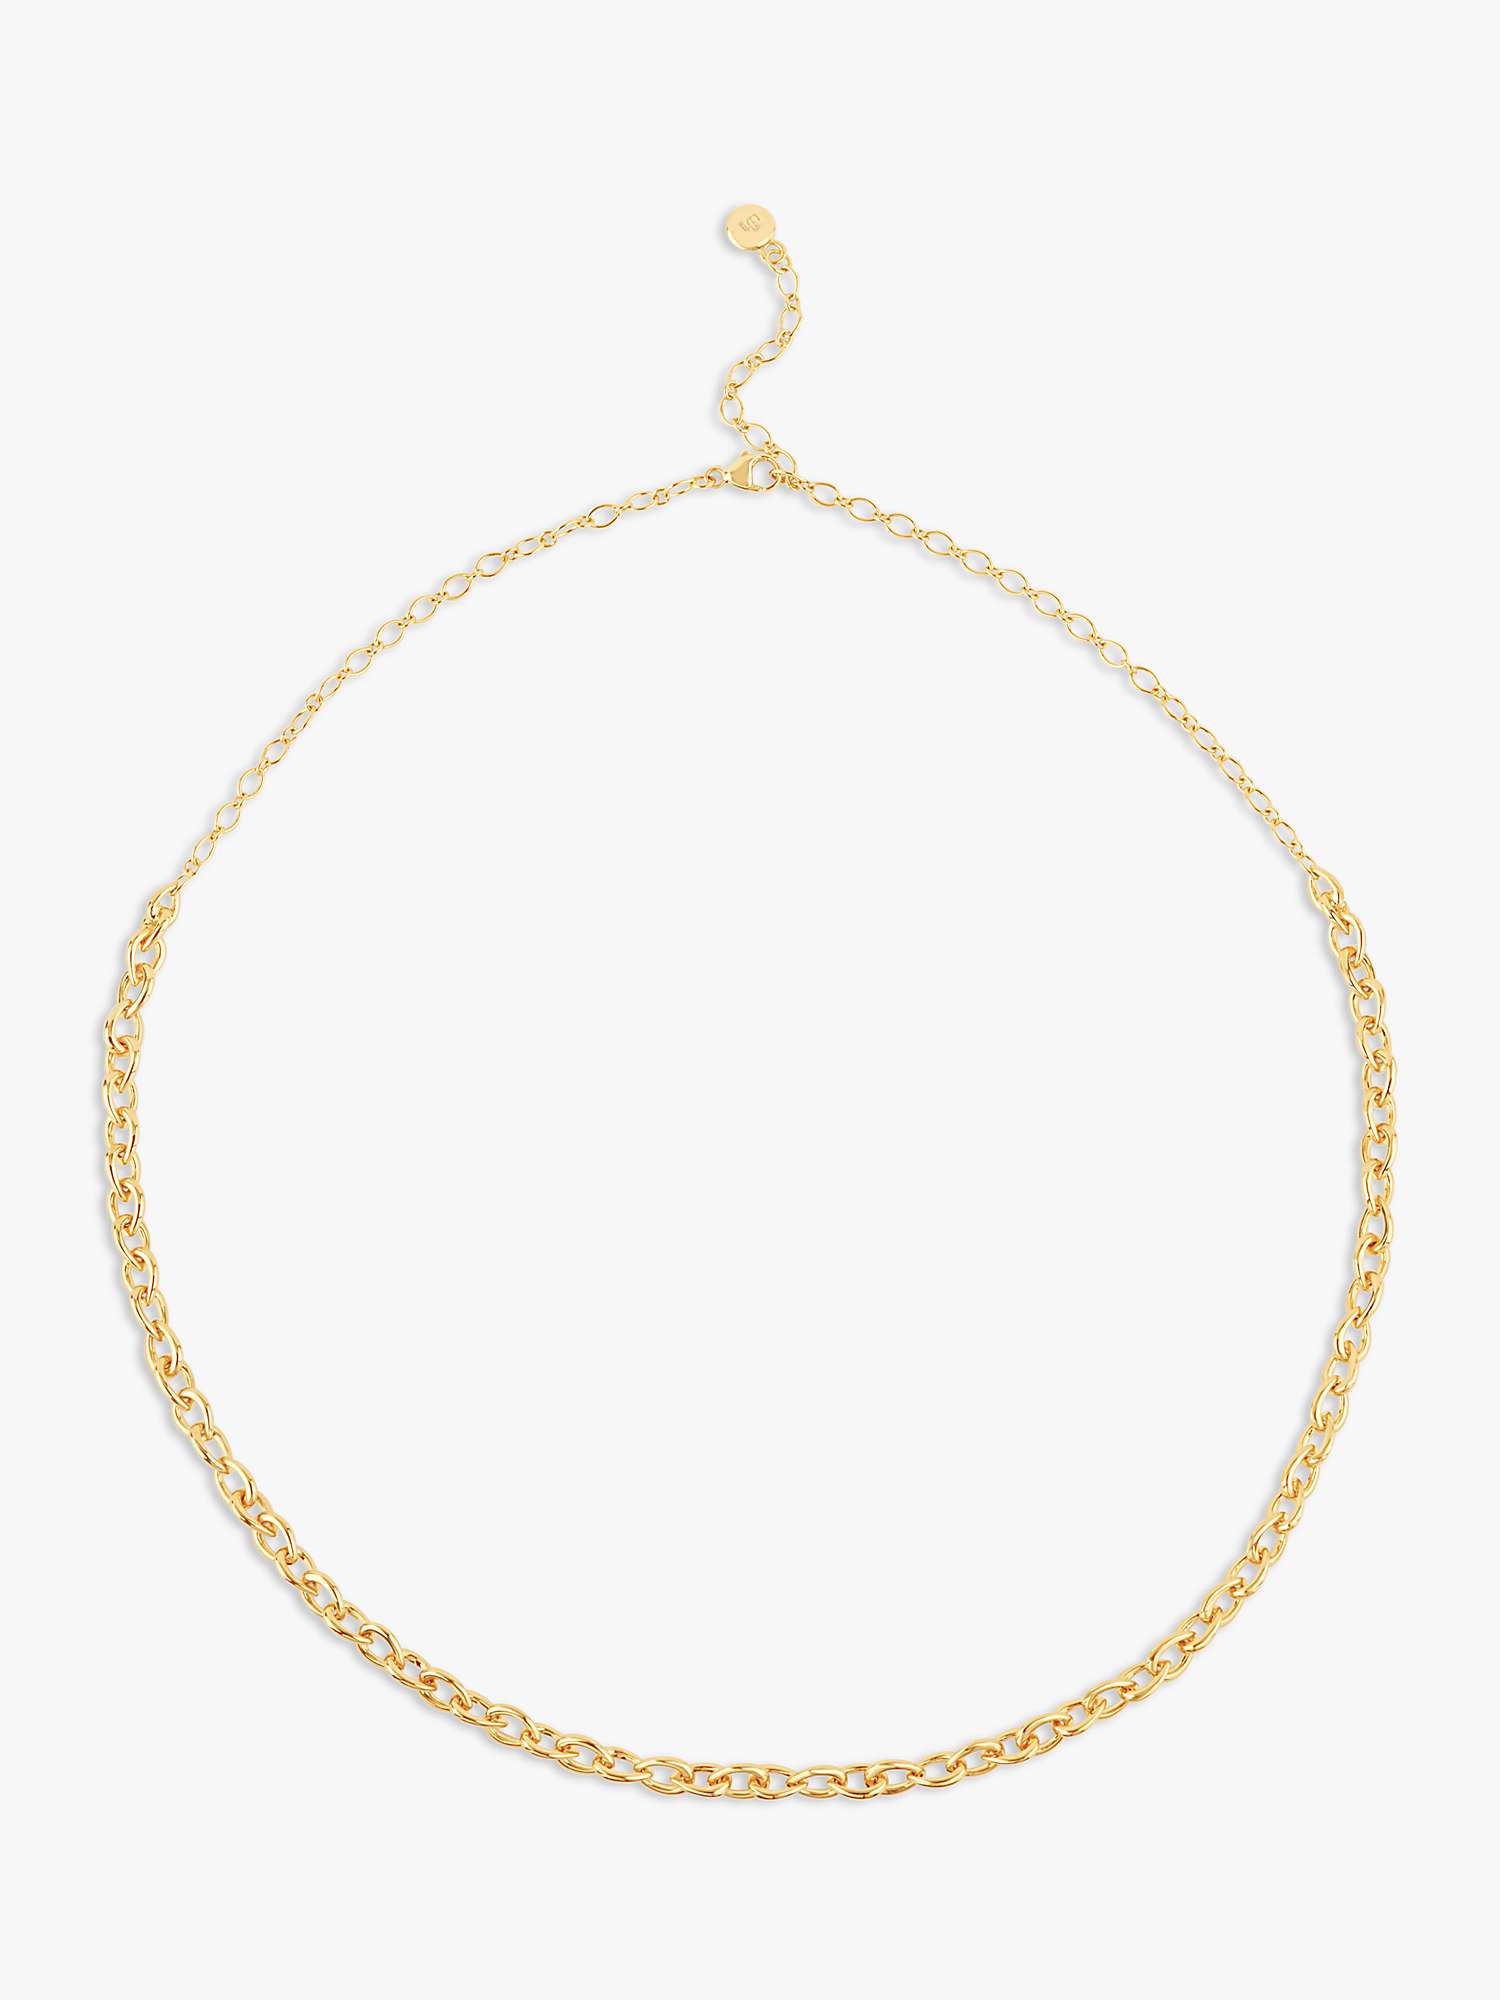 Buy Dinny Hall Raindrop Link Chain Necklace Online at johnlewis.com